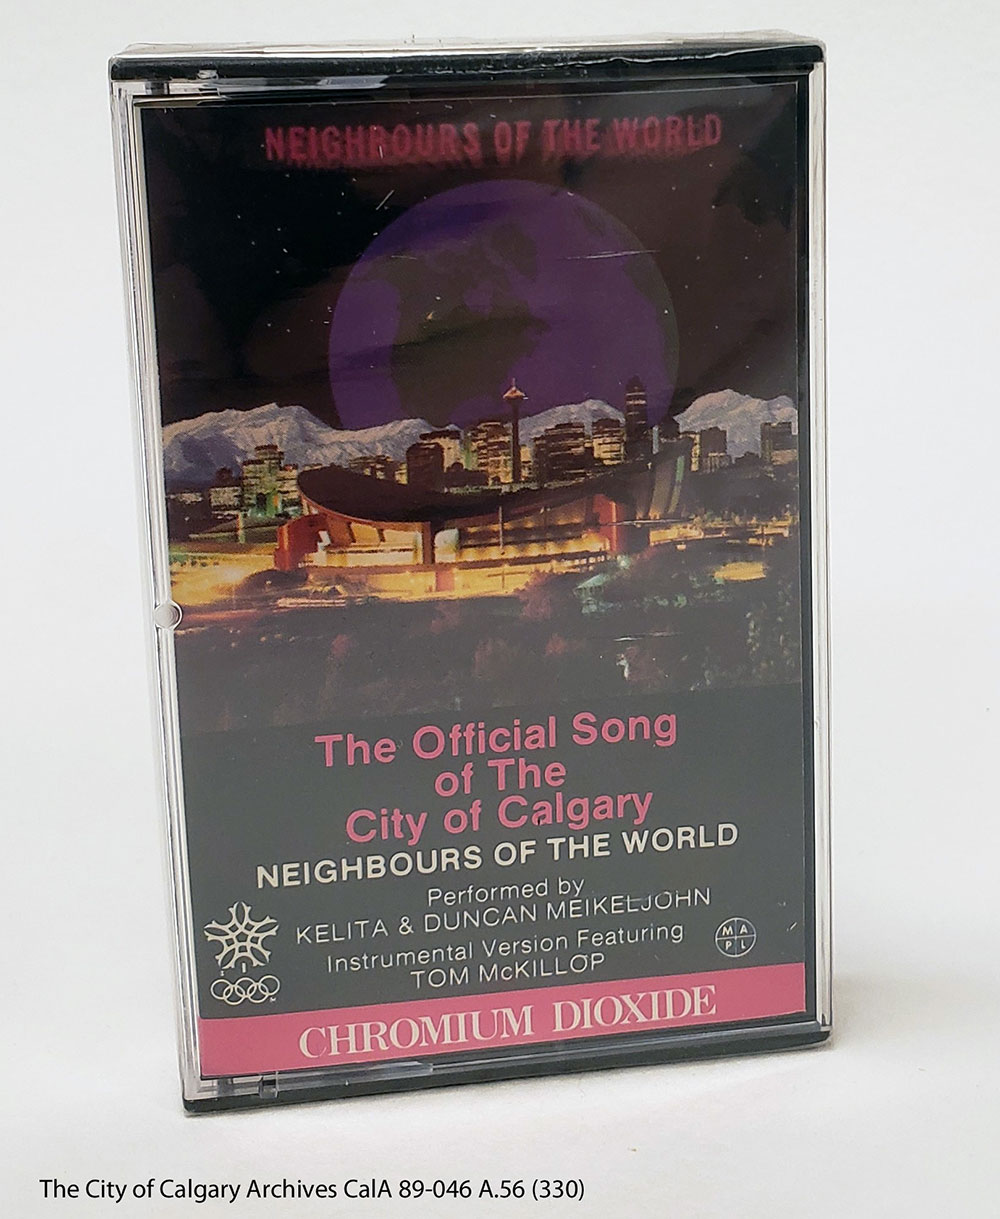 City of Calgary - Neighbours of the World official song